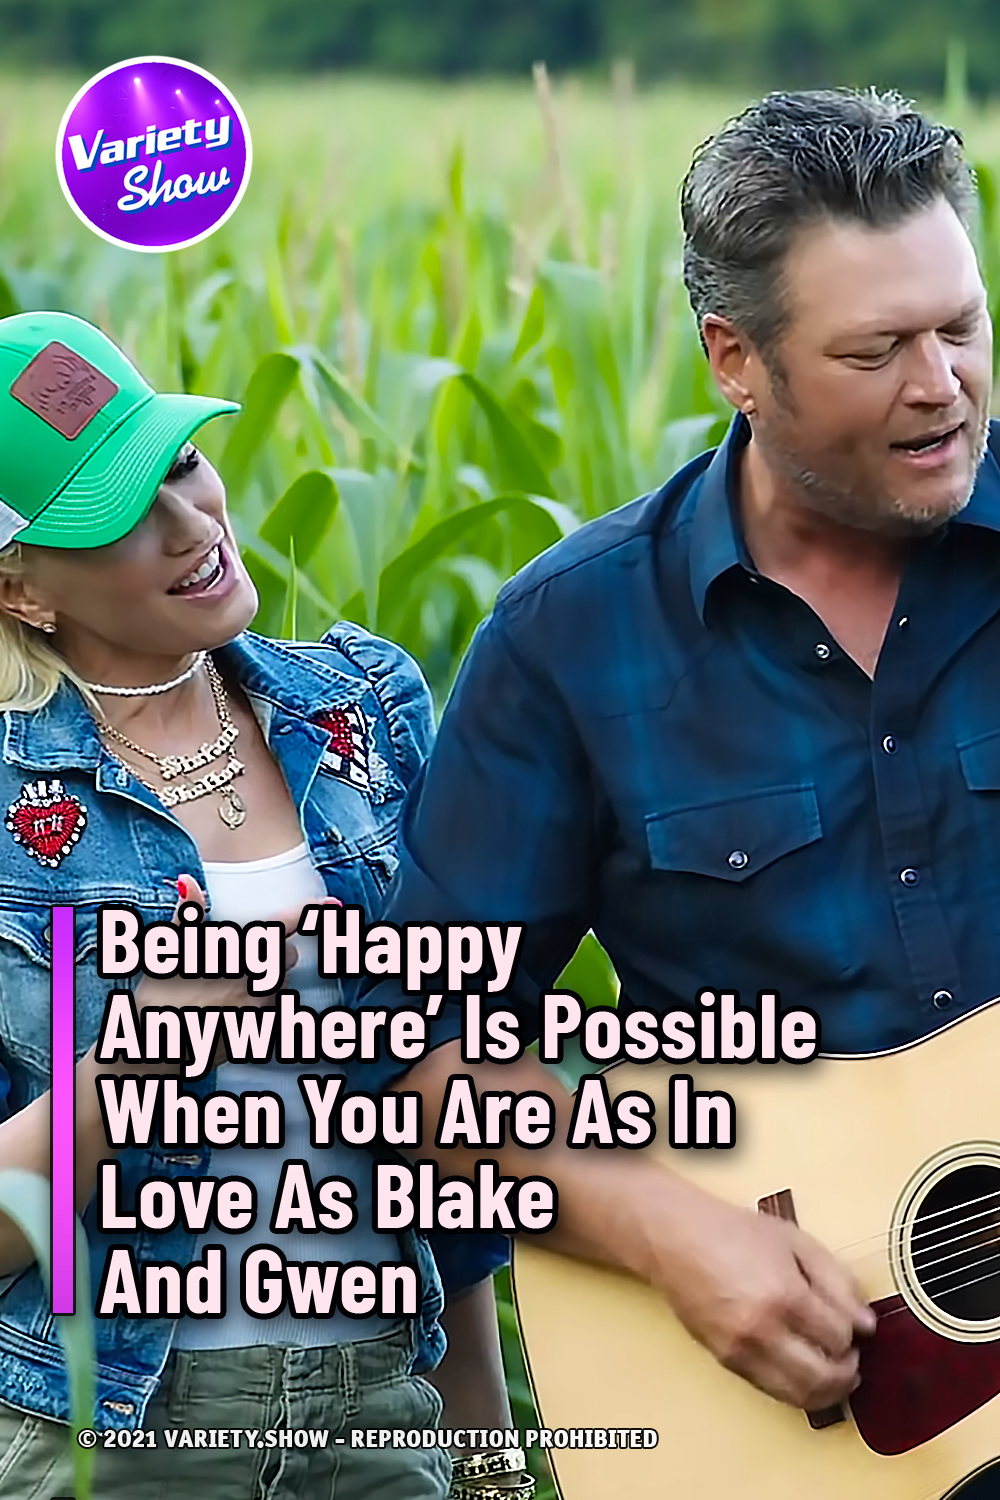 Being ‘Happy Anywhere’ Is Possible When You Are As In Love As Blake And Gwen